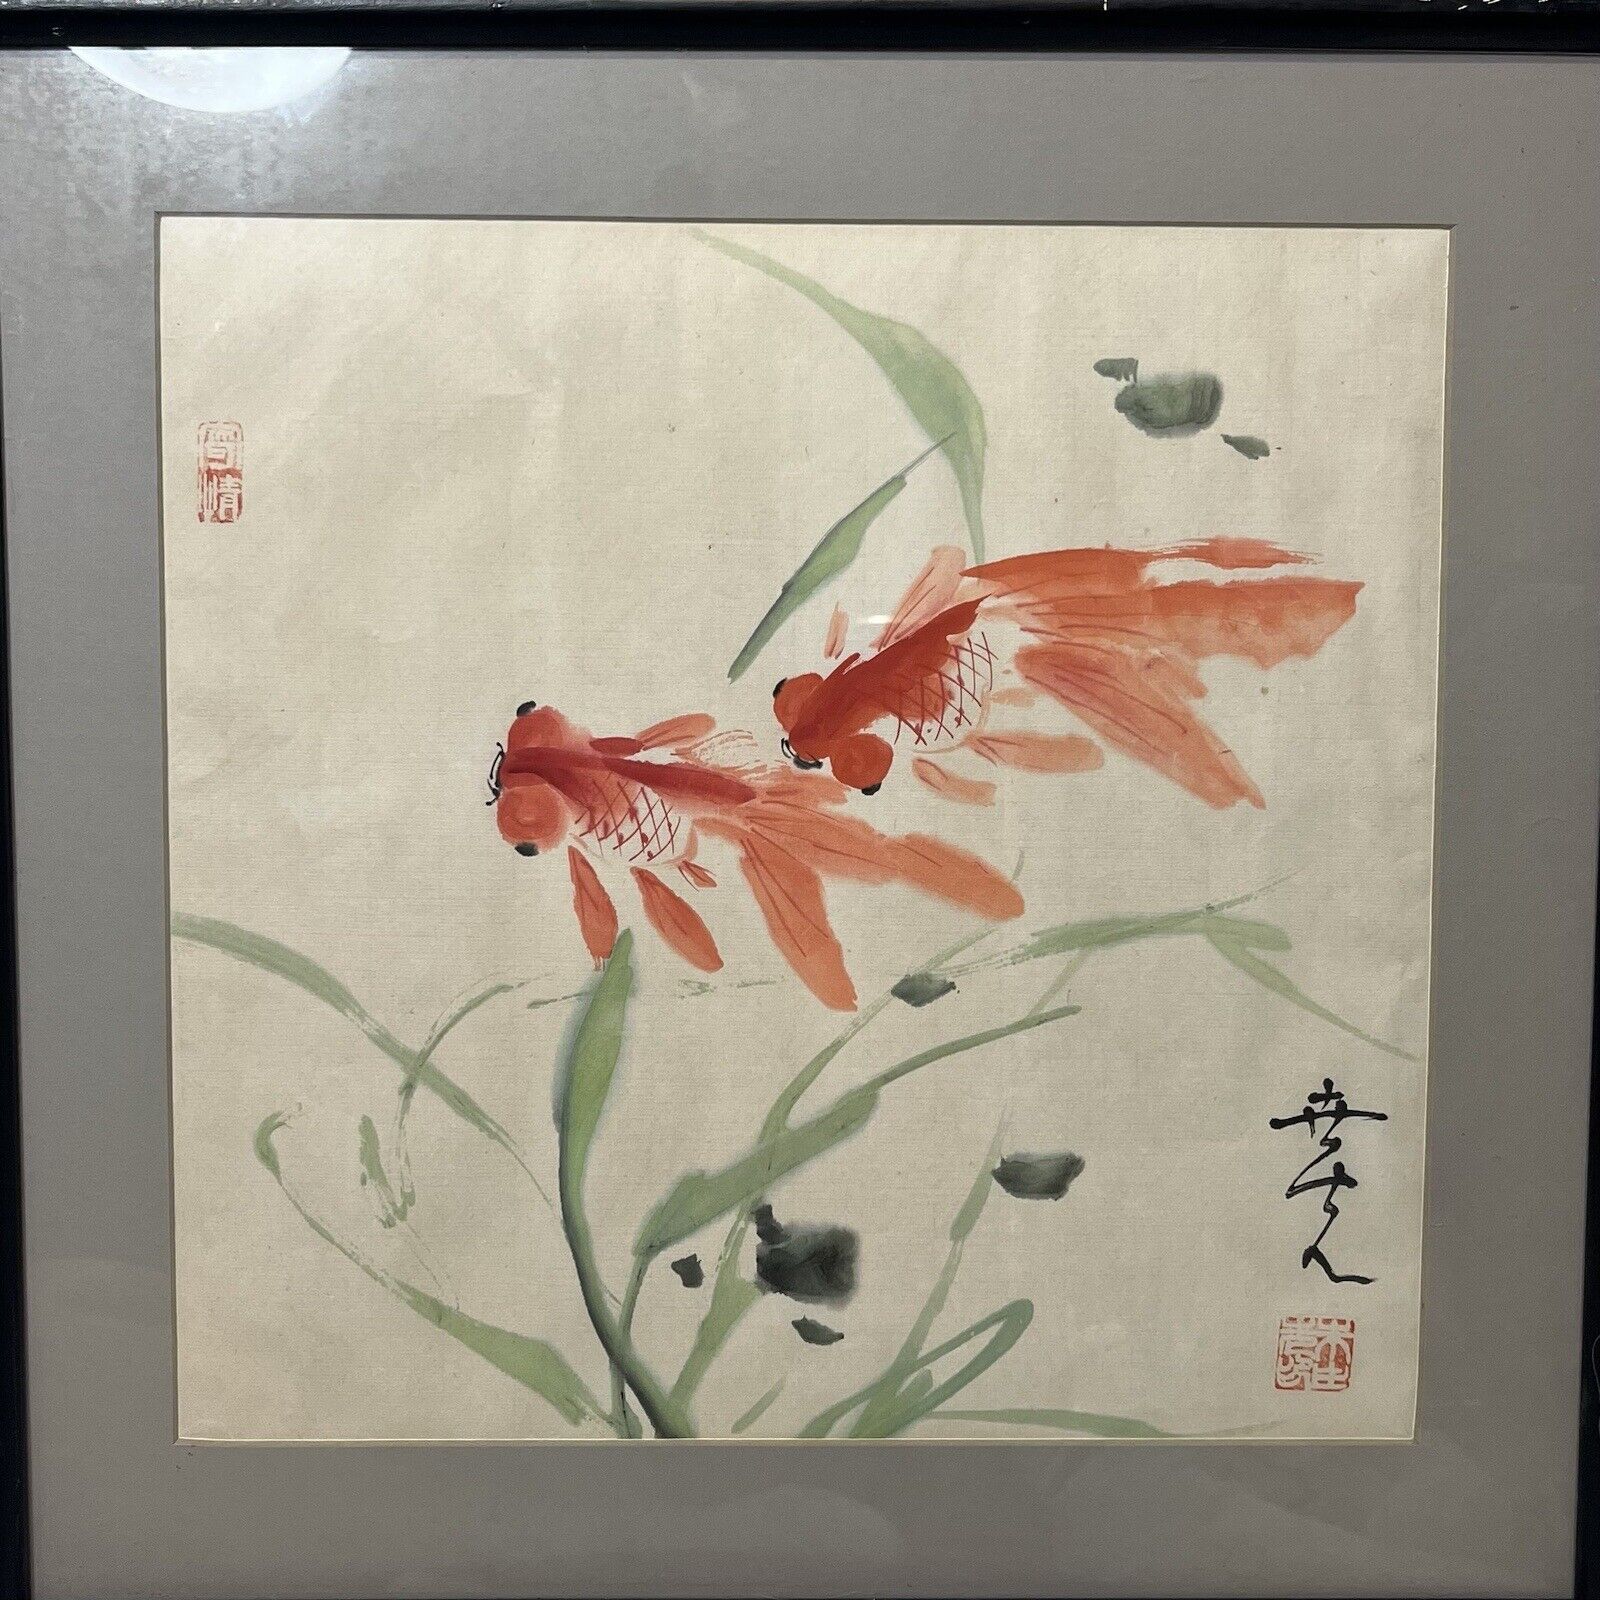 VTG Chinese Art Watercolor of Two Koi Fish-Signed/Stamped 17.5”x17”